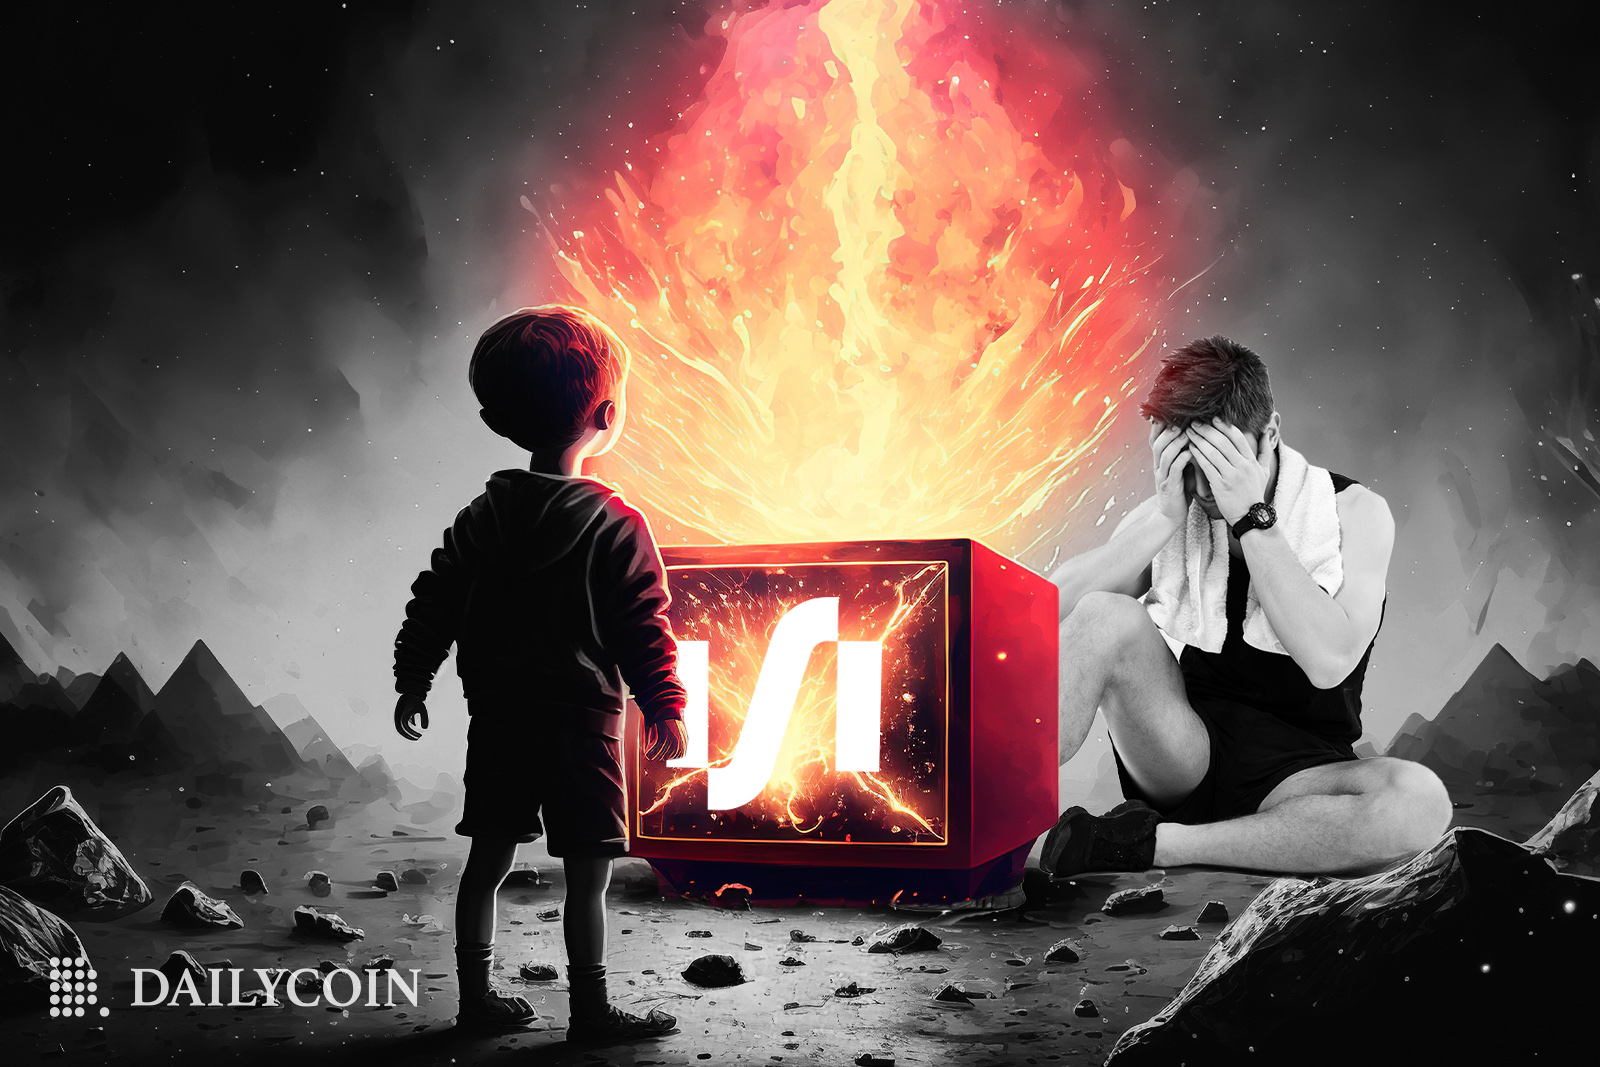 A child watching a depressed man sitting behind a red TV showing Silvergate logo on fire.